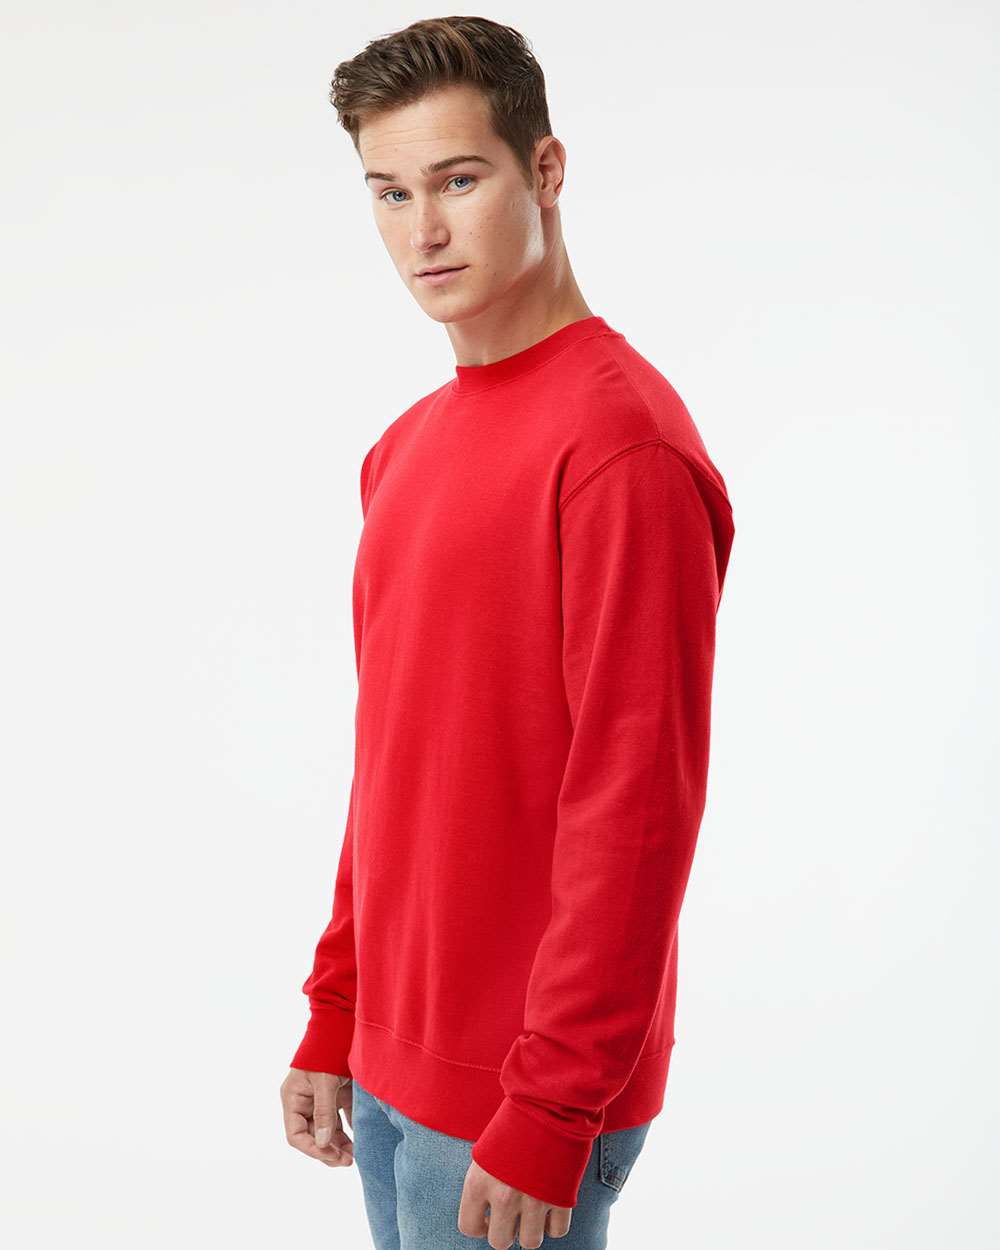 Independent Trading Co. Midweight Sweatshirt SS3000 #colormdl_Red